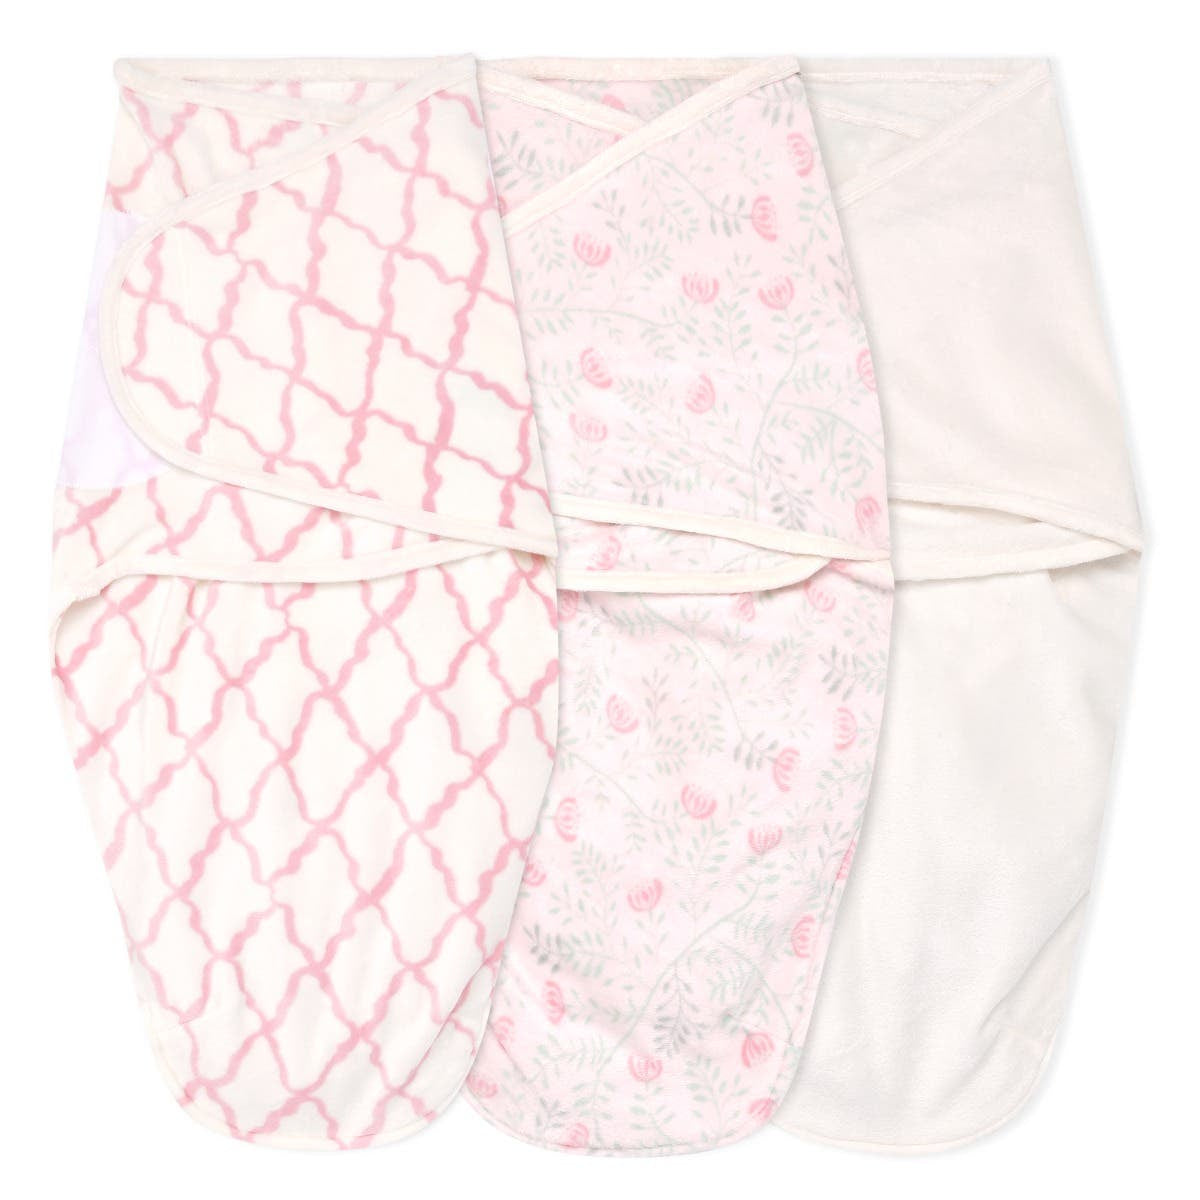 Aden & Anais Easy Swaddle 3 Pack